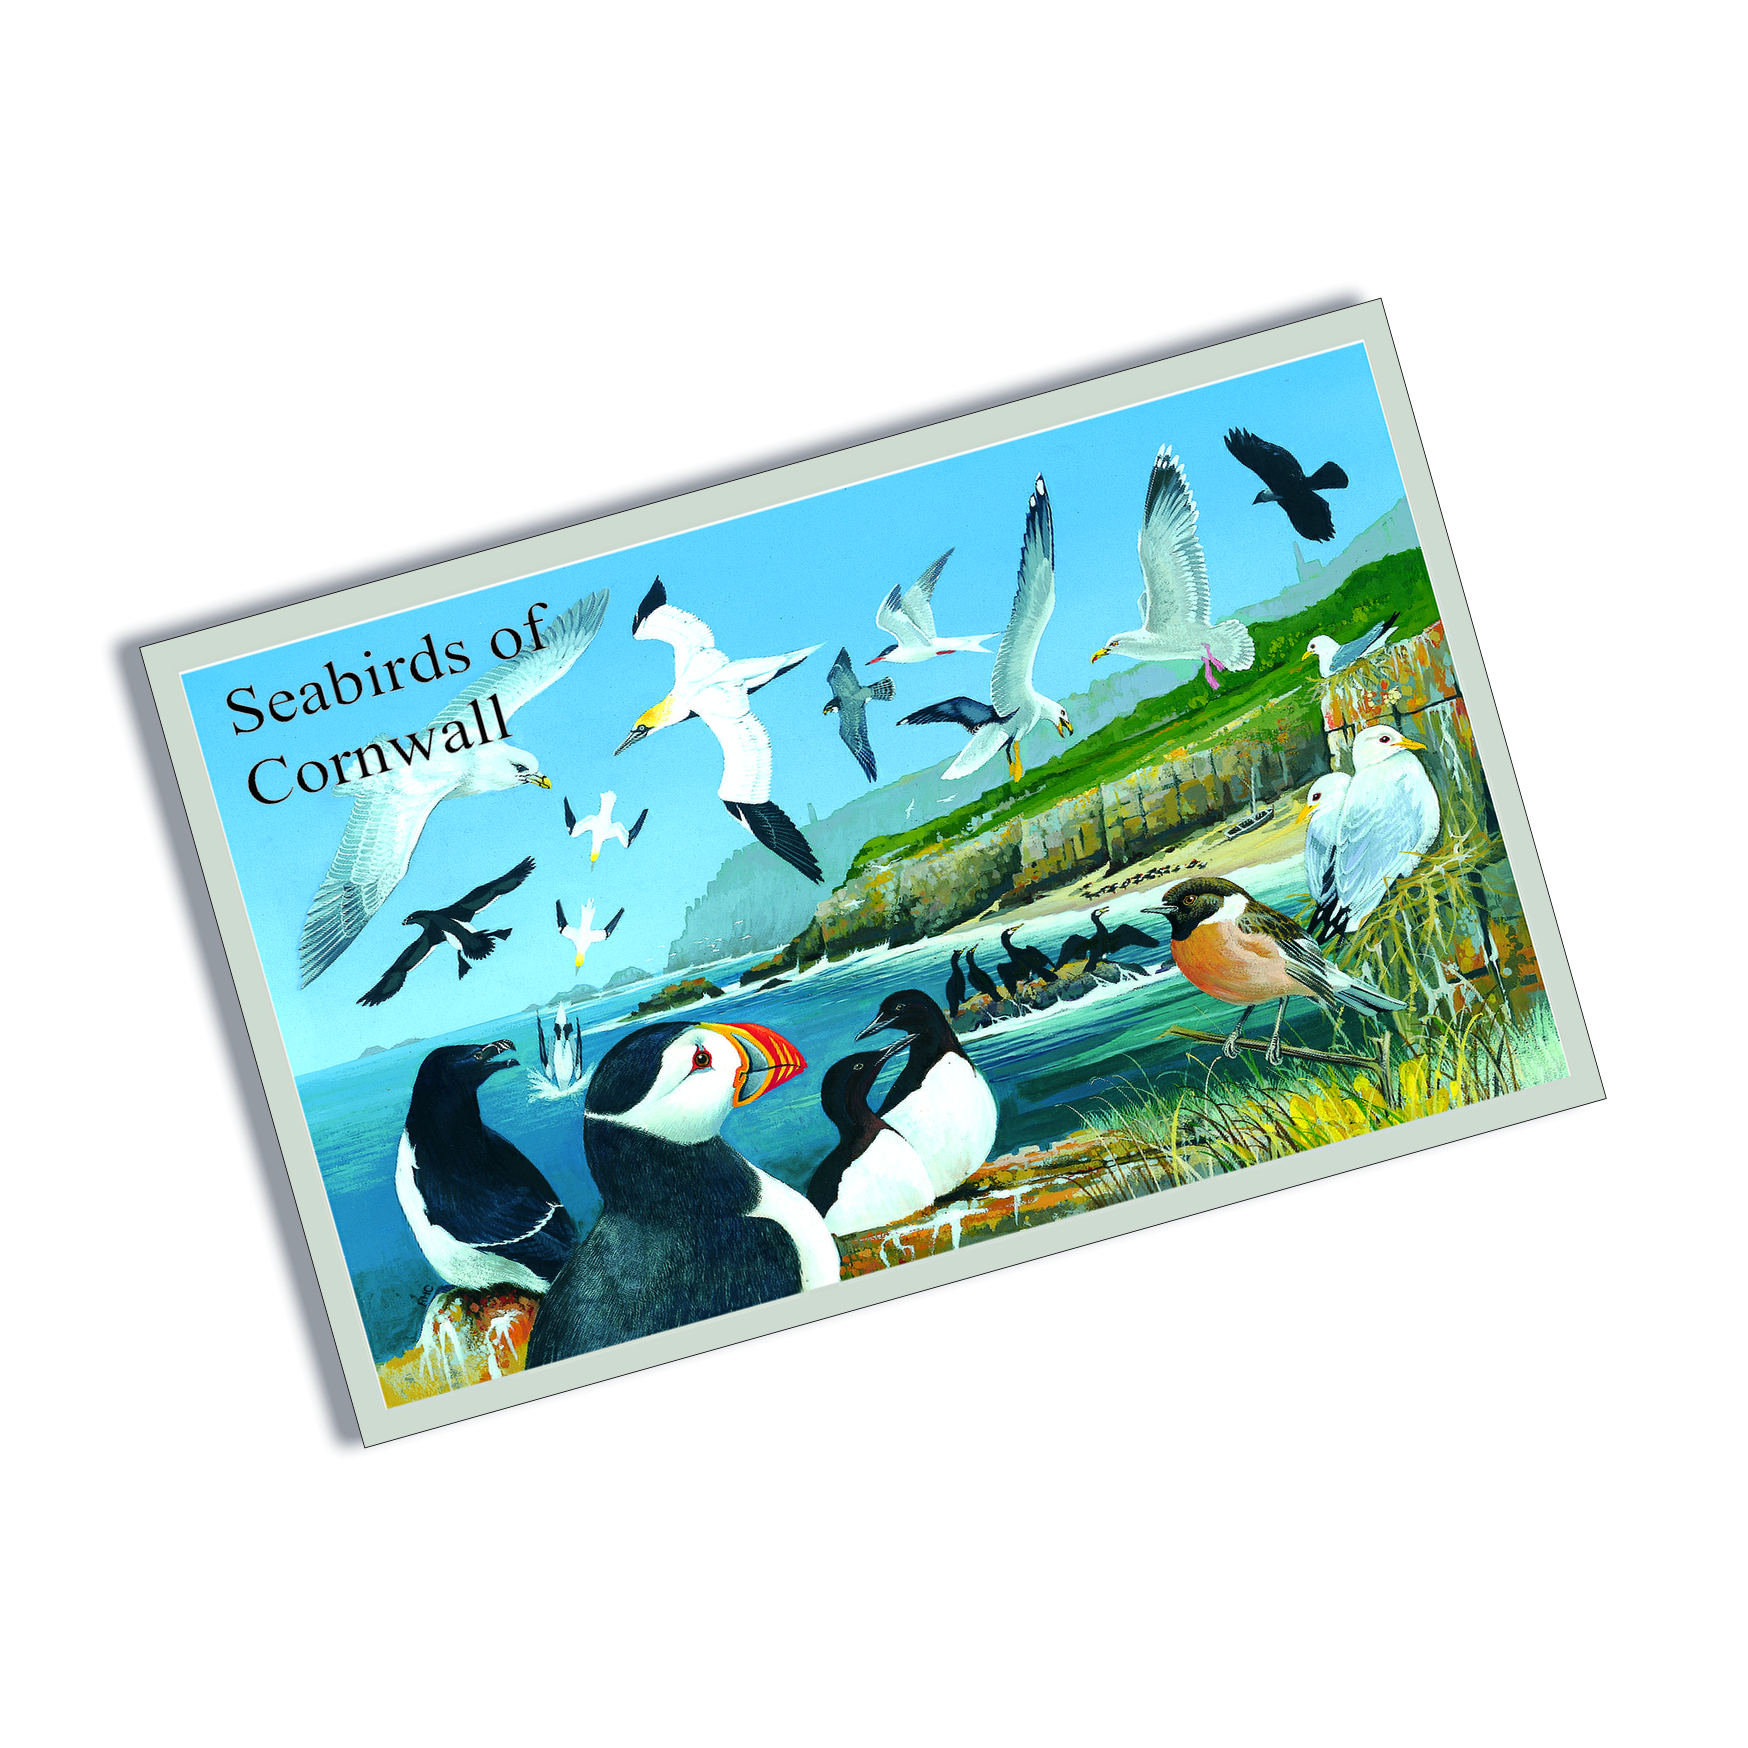 Tin Plate Magnet Seabirds of Cornwall